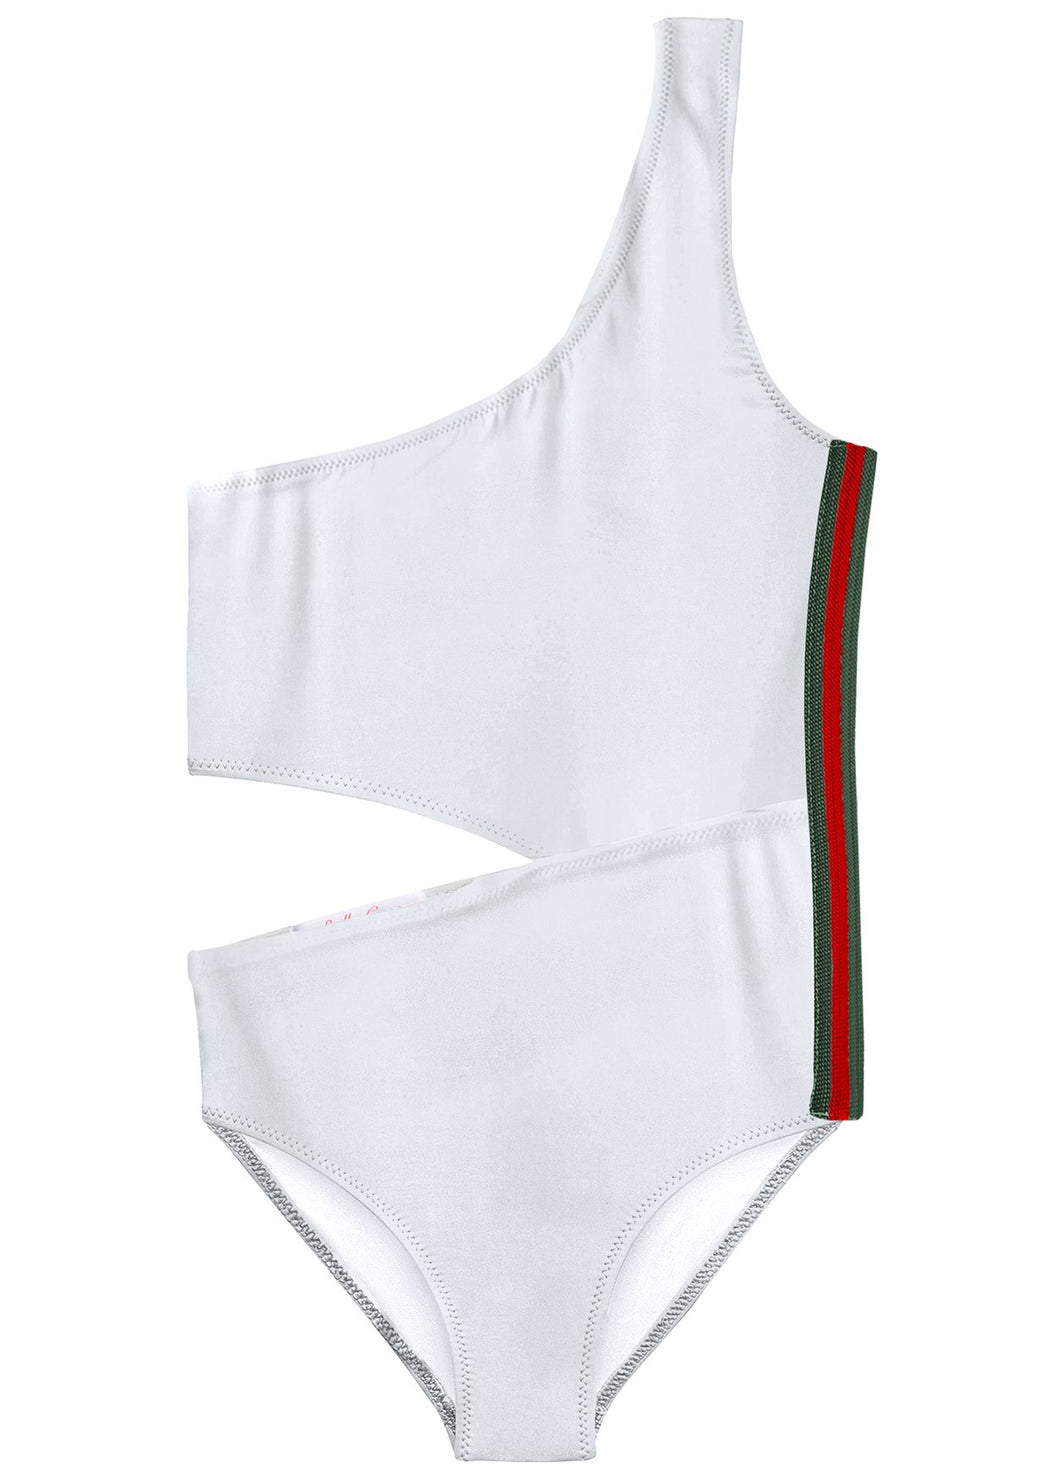 White Side-Cut Swimsuit with Stripe